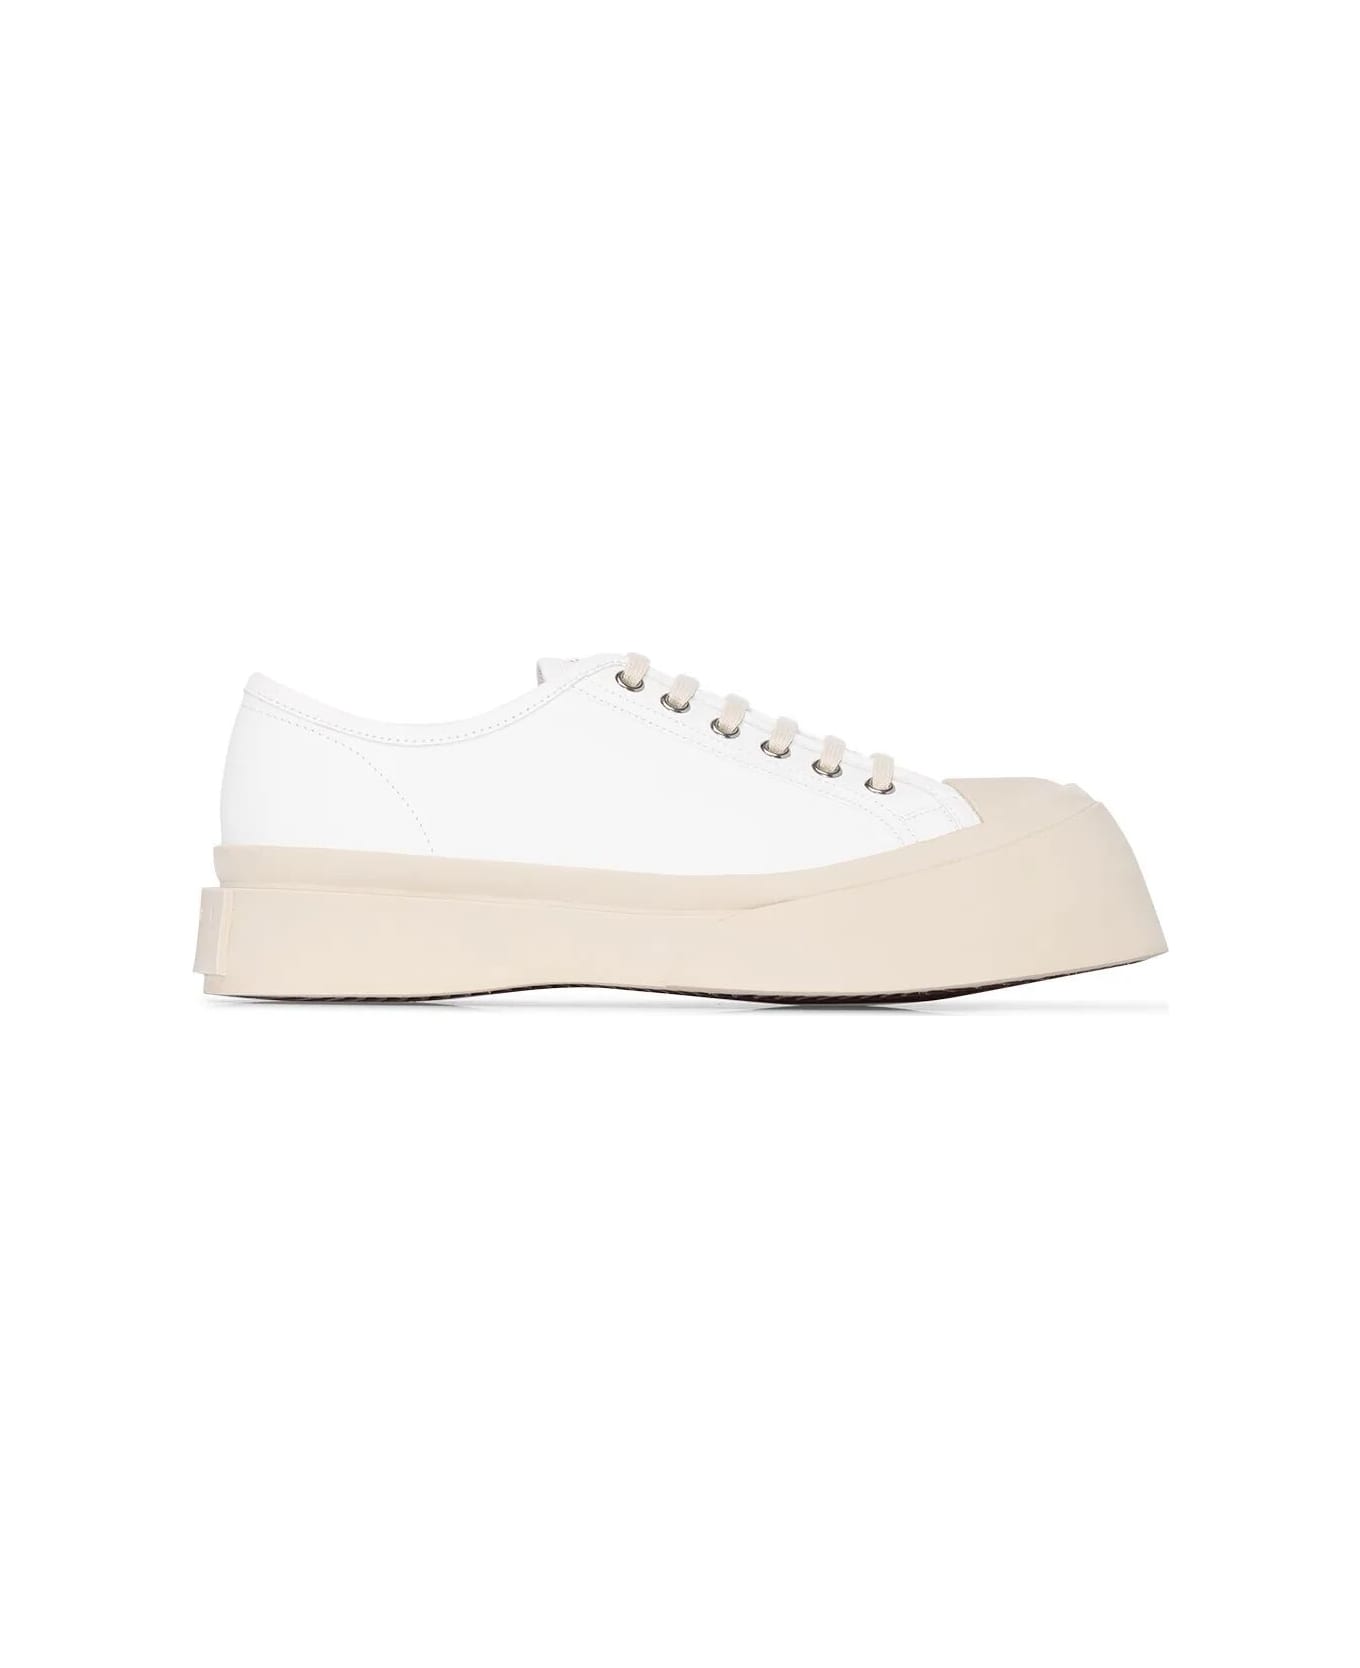 Marni Laced Up Shoes - Lily White ウェッジシューズ